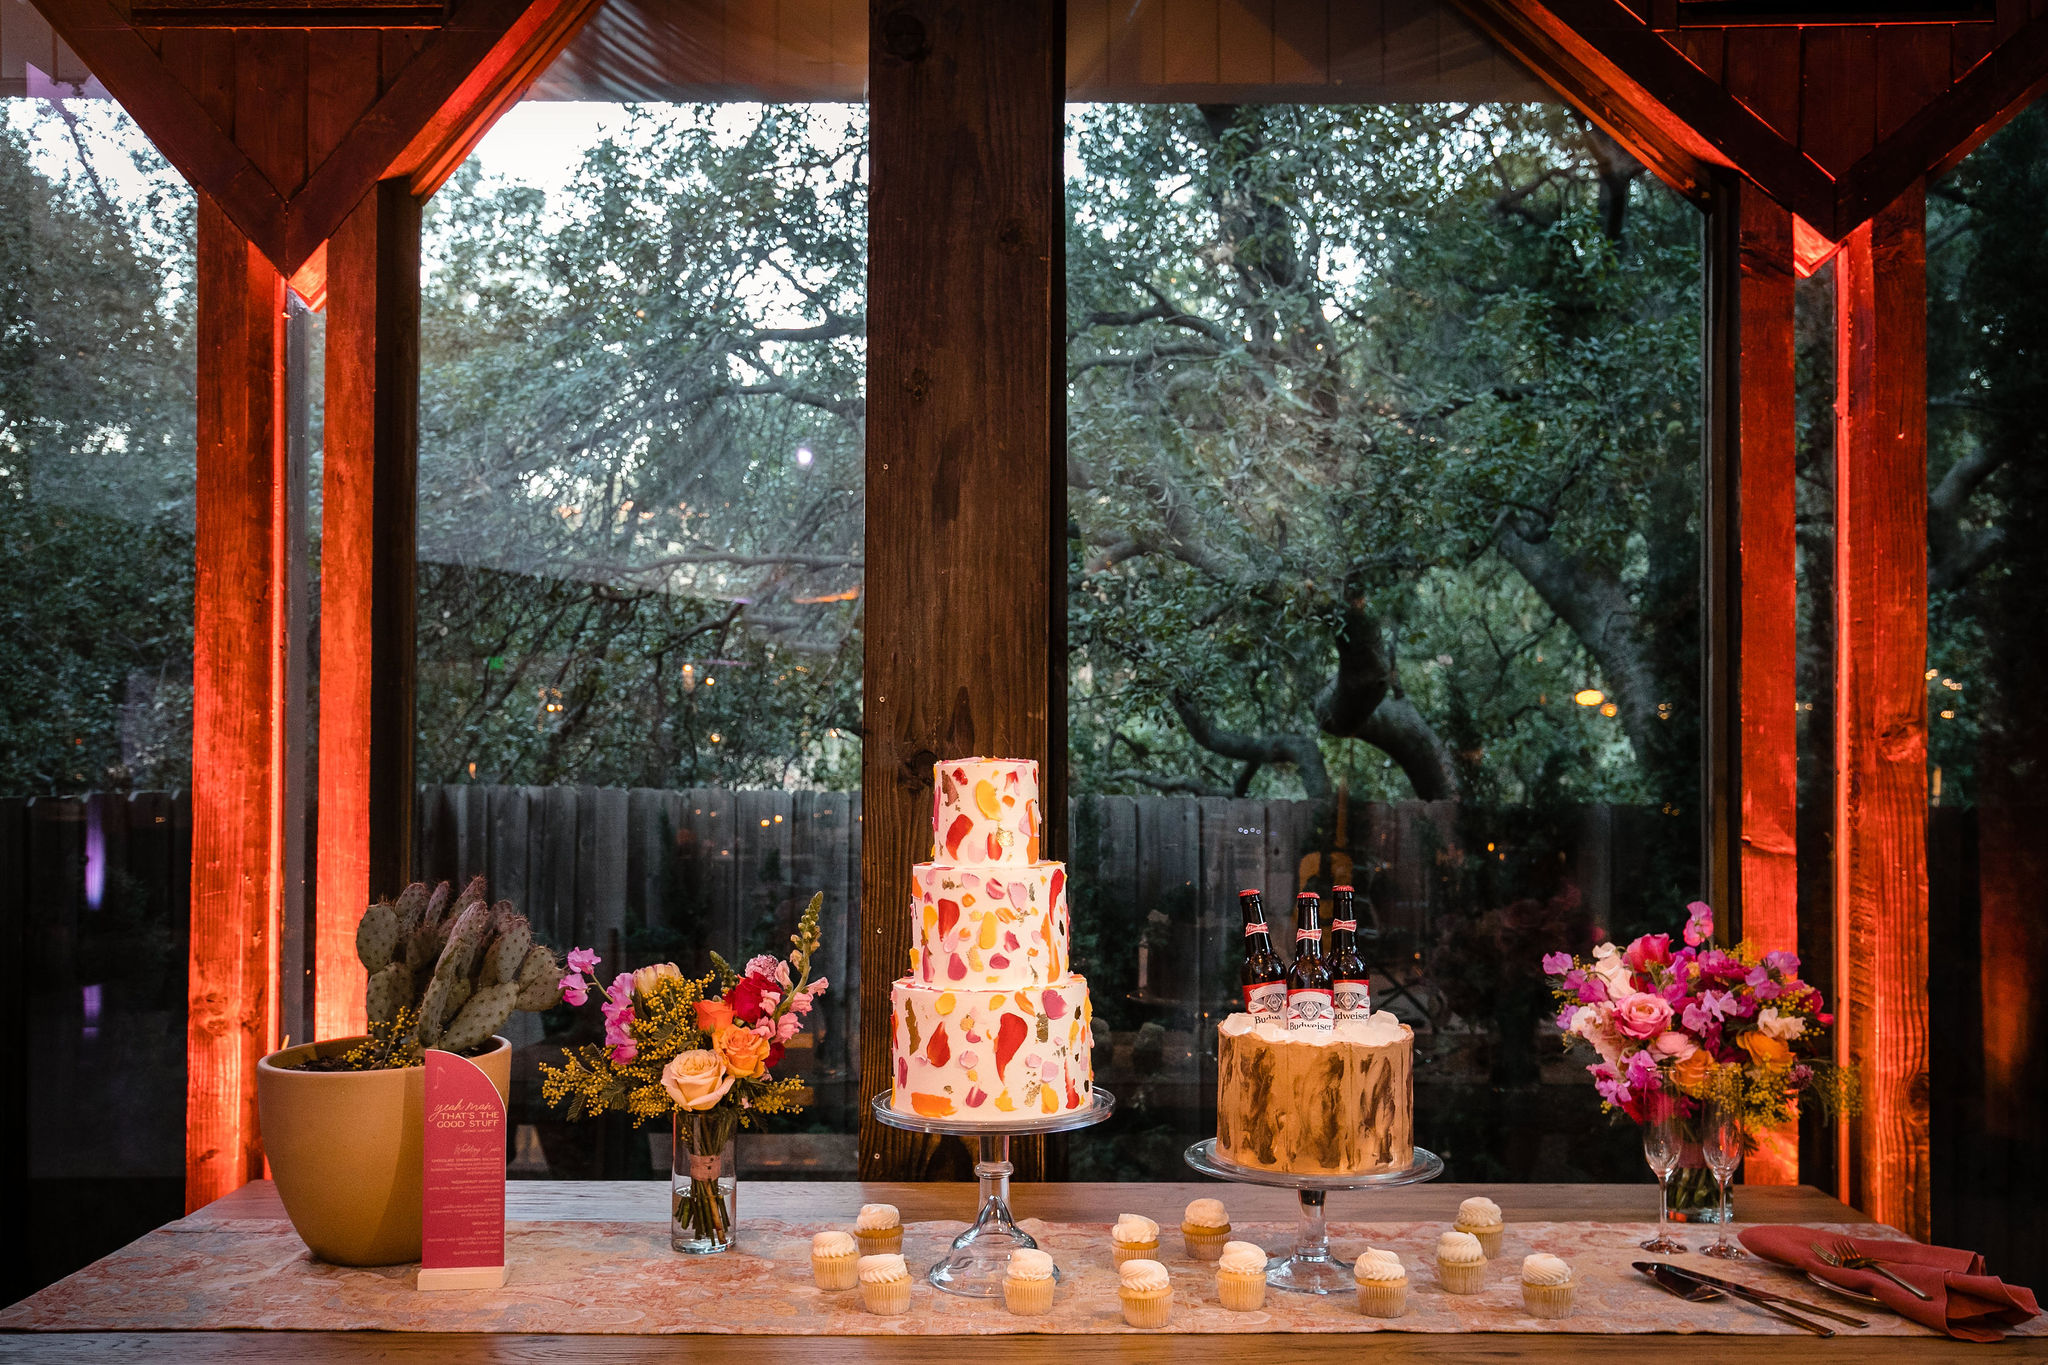 dessert table with beer groom cake and watercolored three tier wedding cake